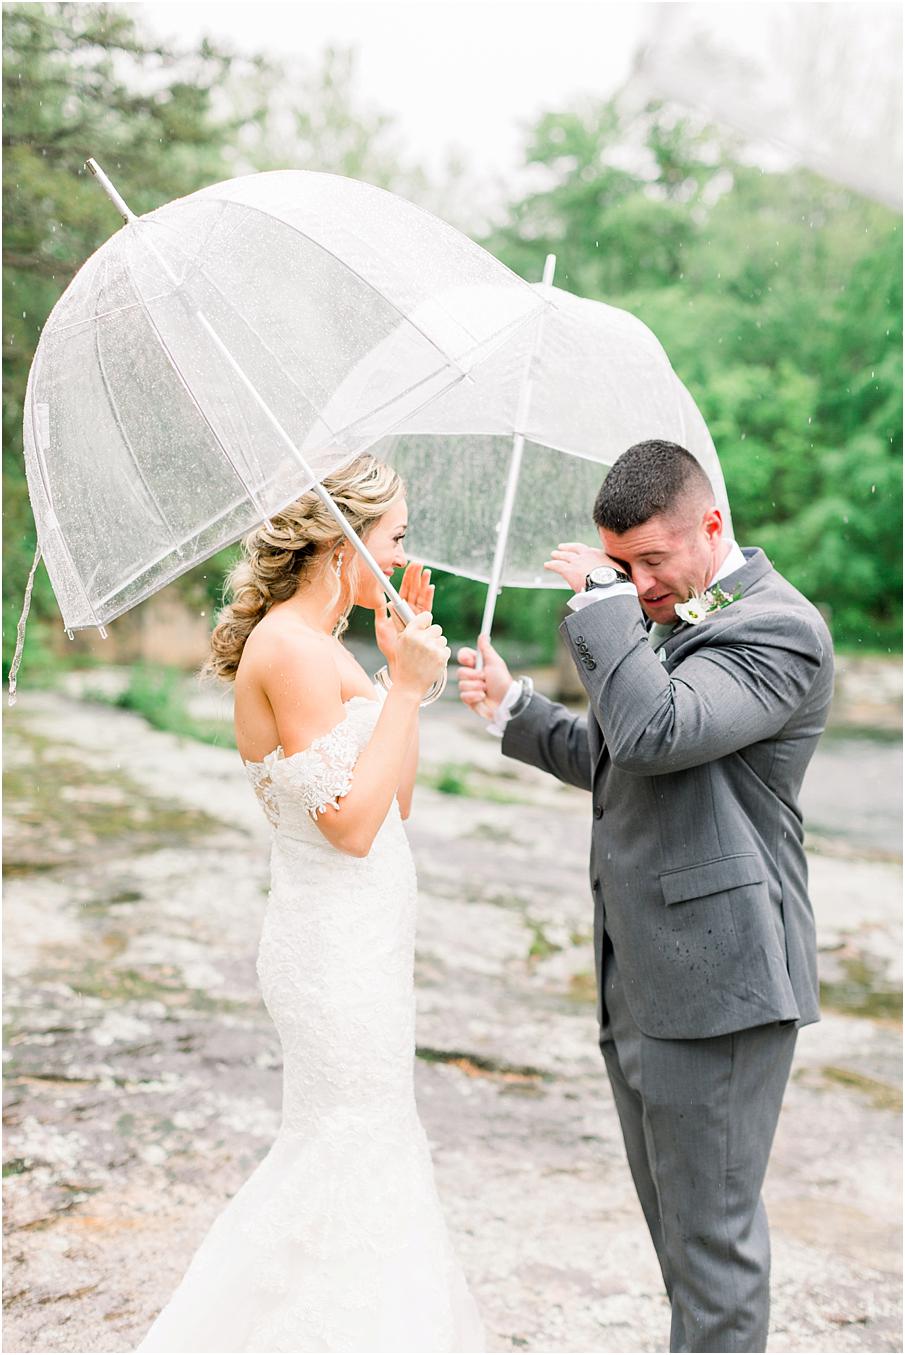 Bride and Groom seeing each other for the first time with umbrellas in hand to block the rain. Their Mill at Fine Creek wedding day was filled with beautiful rain portraits.